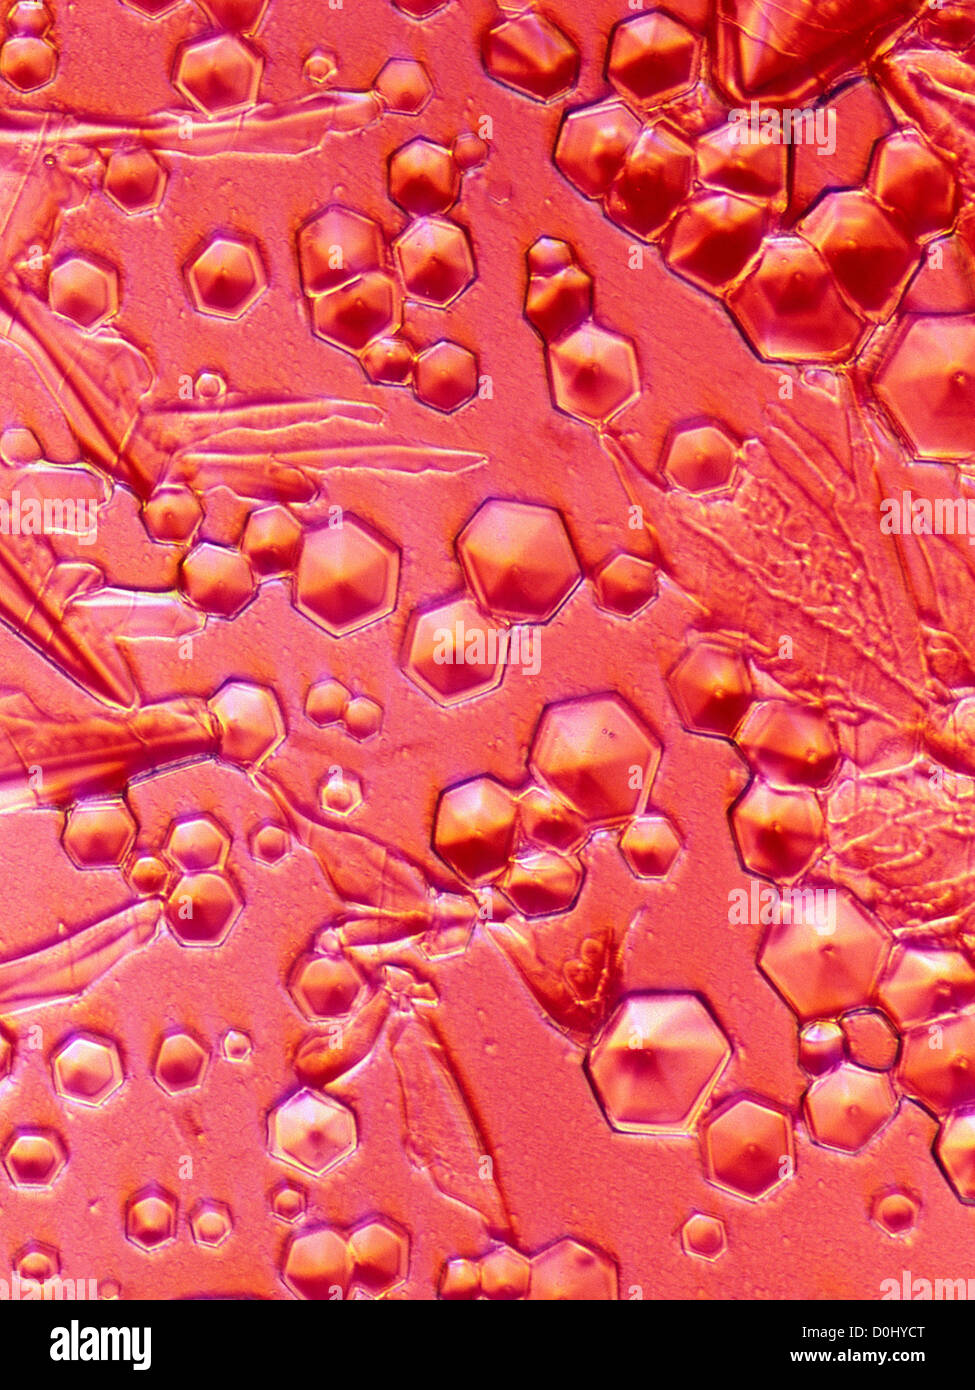 Oligomer Crystals from Dyed Polyester Fibers, Partly Crossed Polars, Red Filter, Oblique Transmitted Light Illumination, x250 Stock Photo